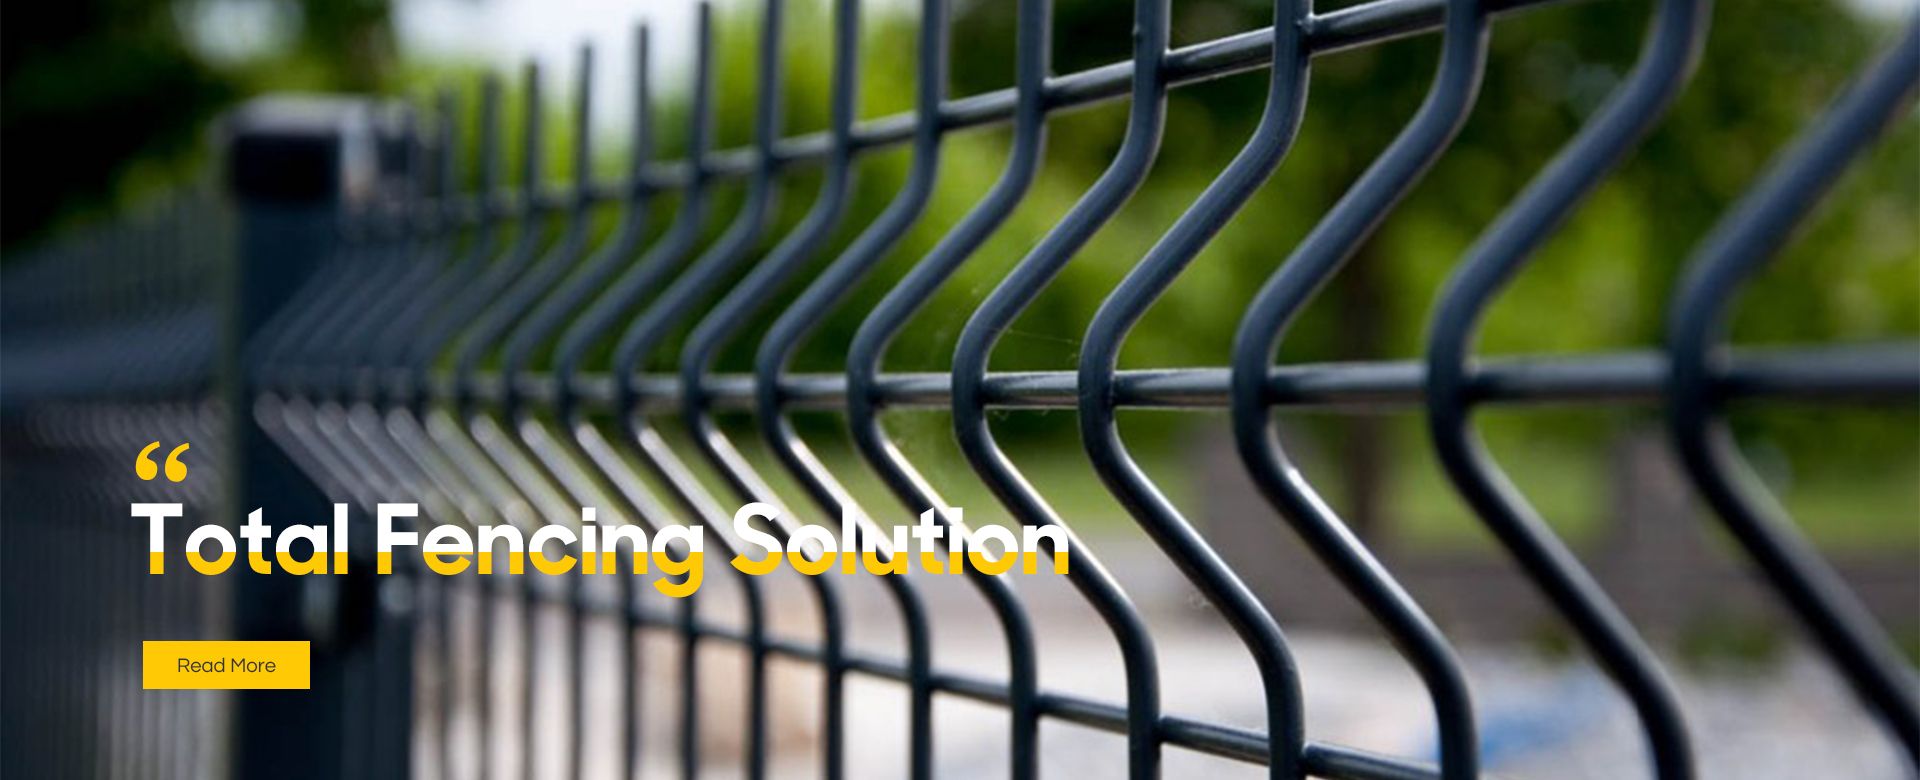 Total Fencing Solution